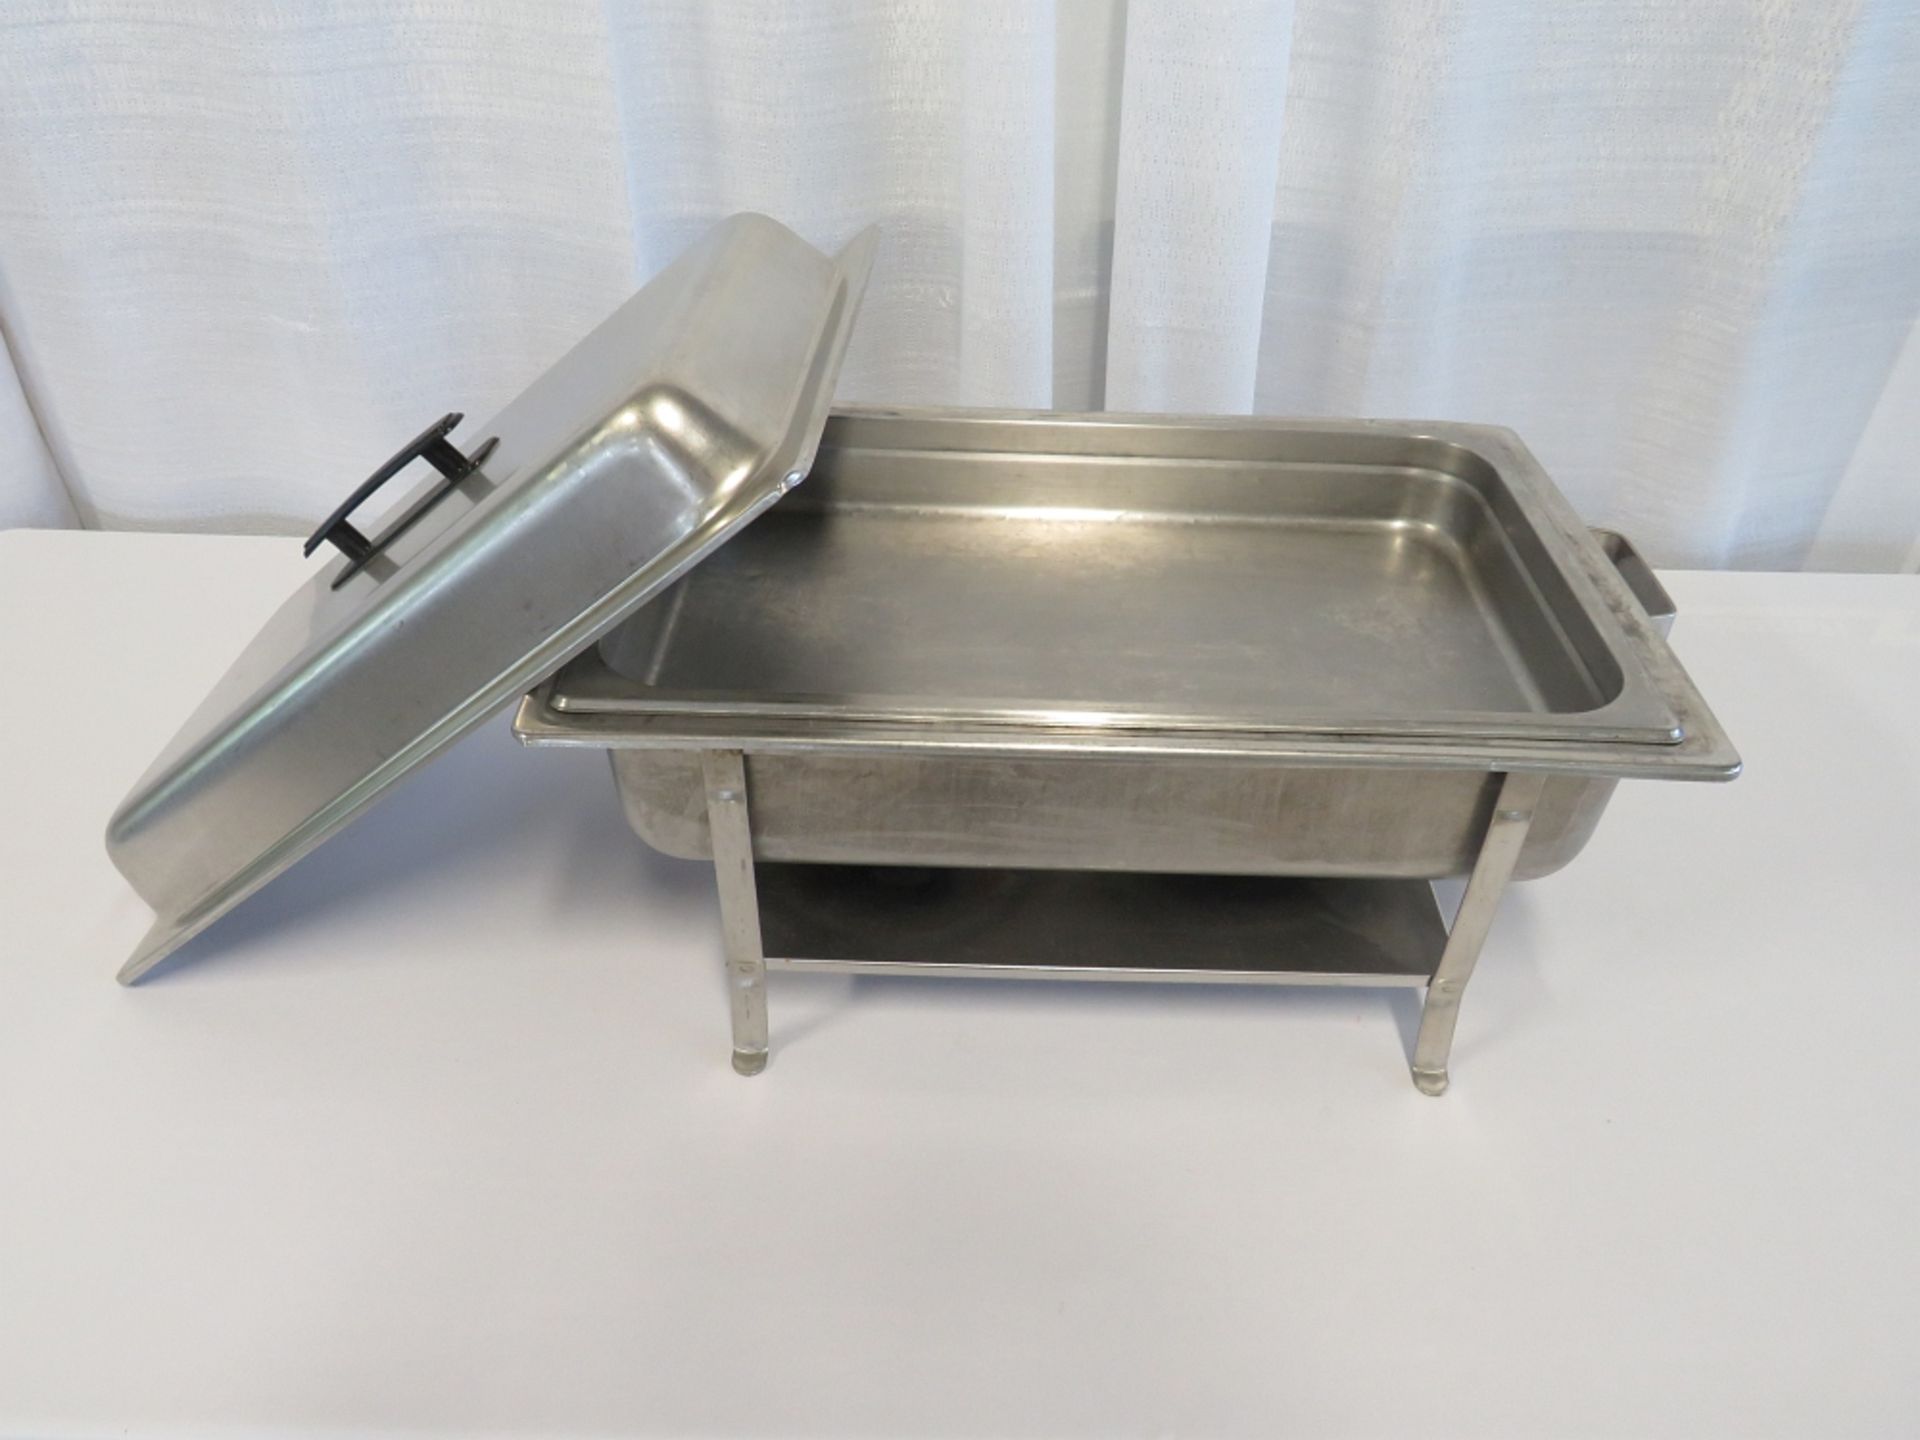 Stainless 8 Qt. Chafer - Image 2 of 2